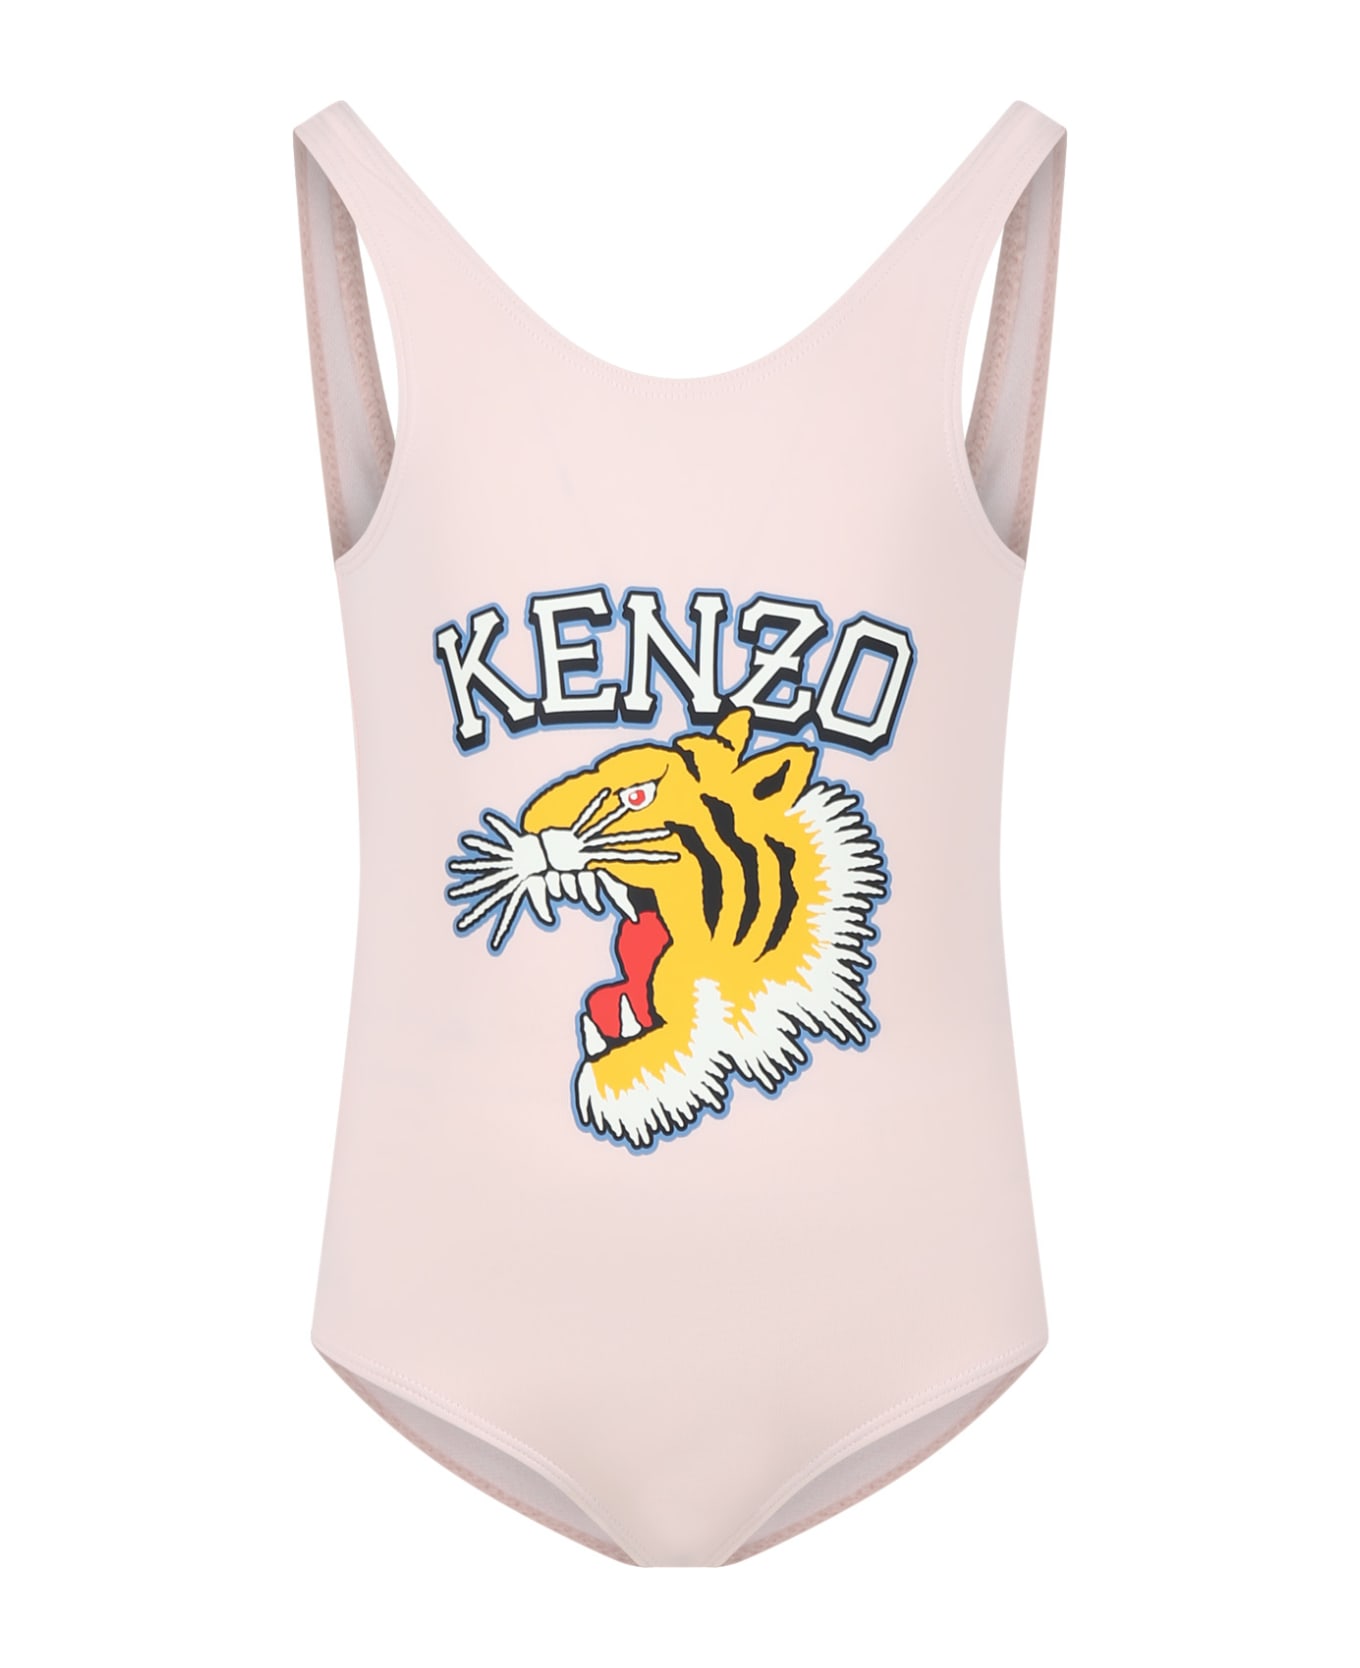 Kenzo Kids Pink Swimwuit For Girl With Print And Logo - Pink